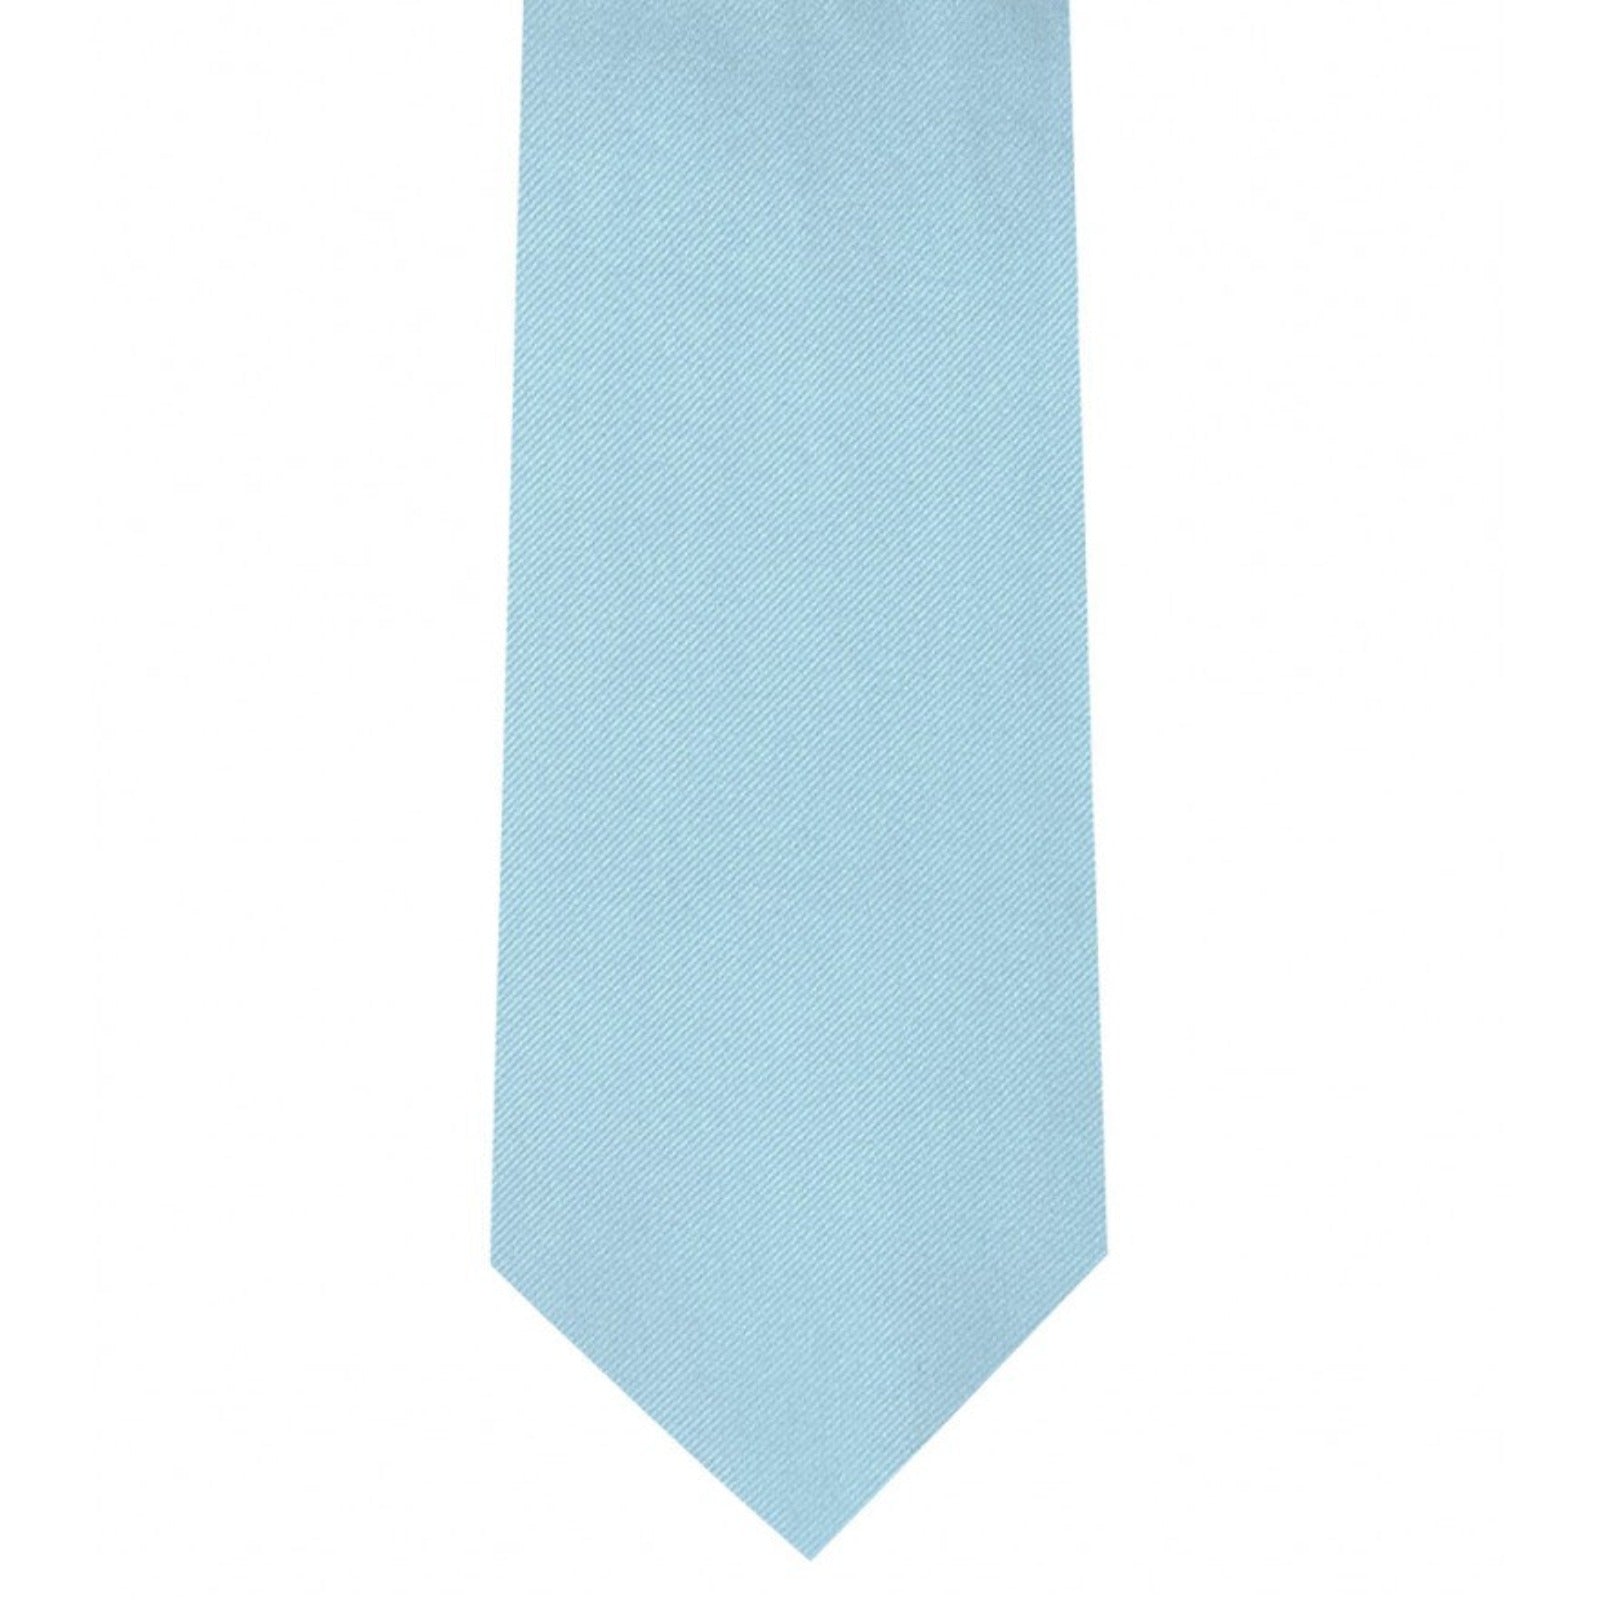 Classic Powder Blue Tie Ultra Skinny tie width 2.25 inches With Matching Pocket Square | KCT Menswear